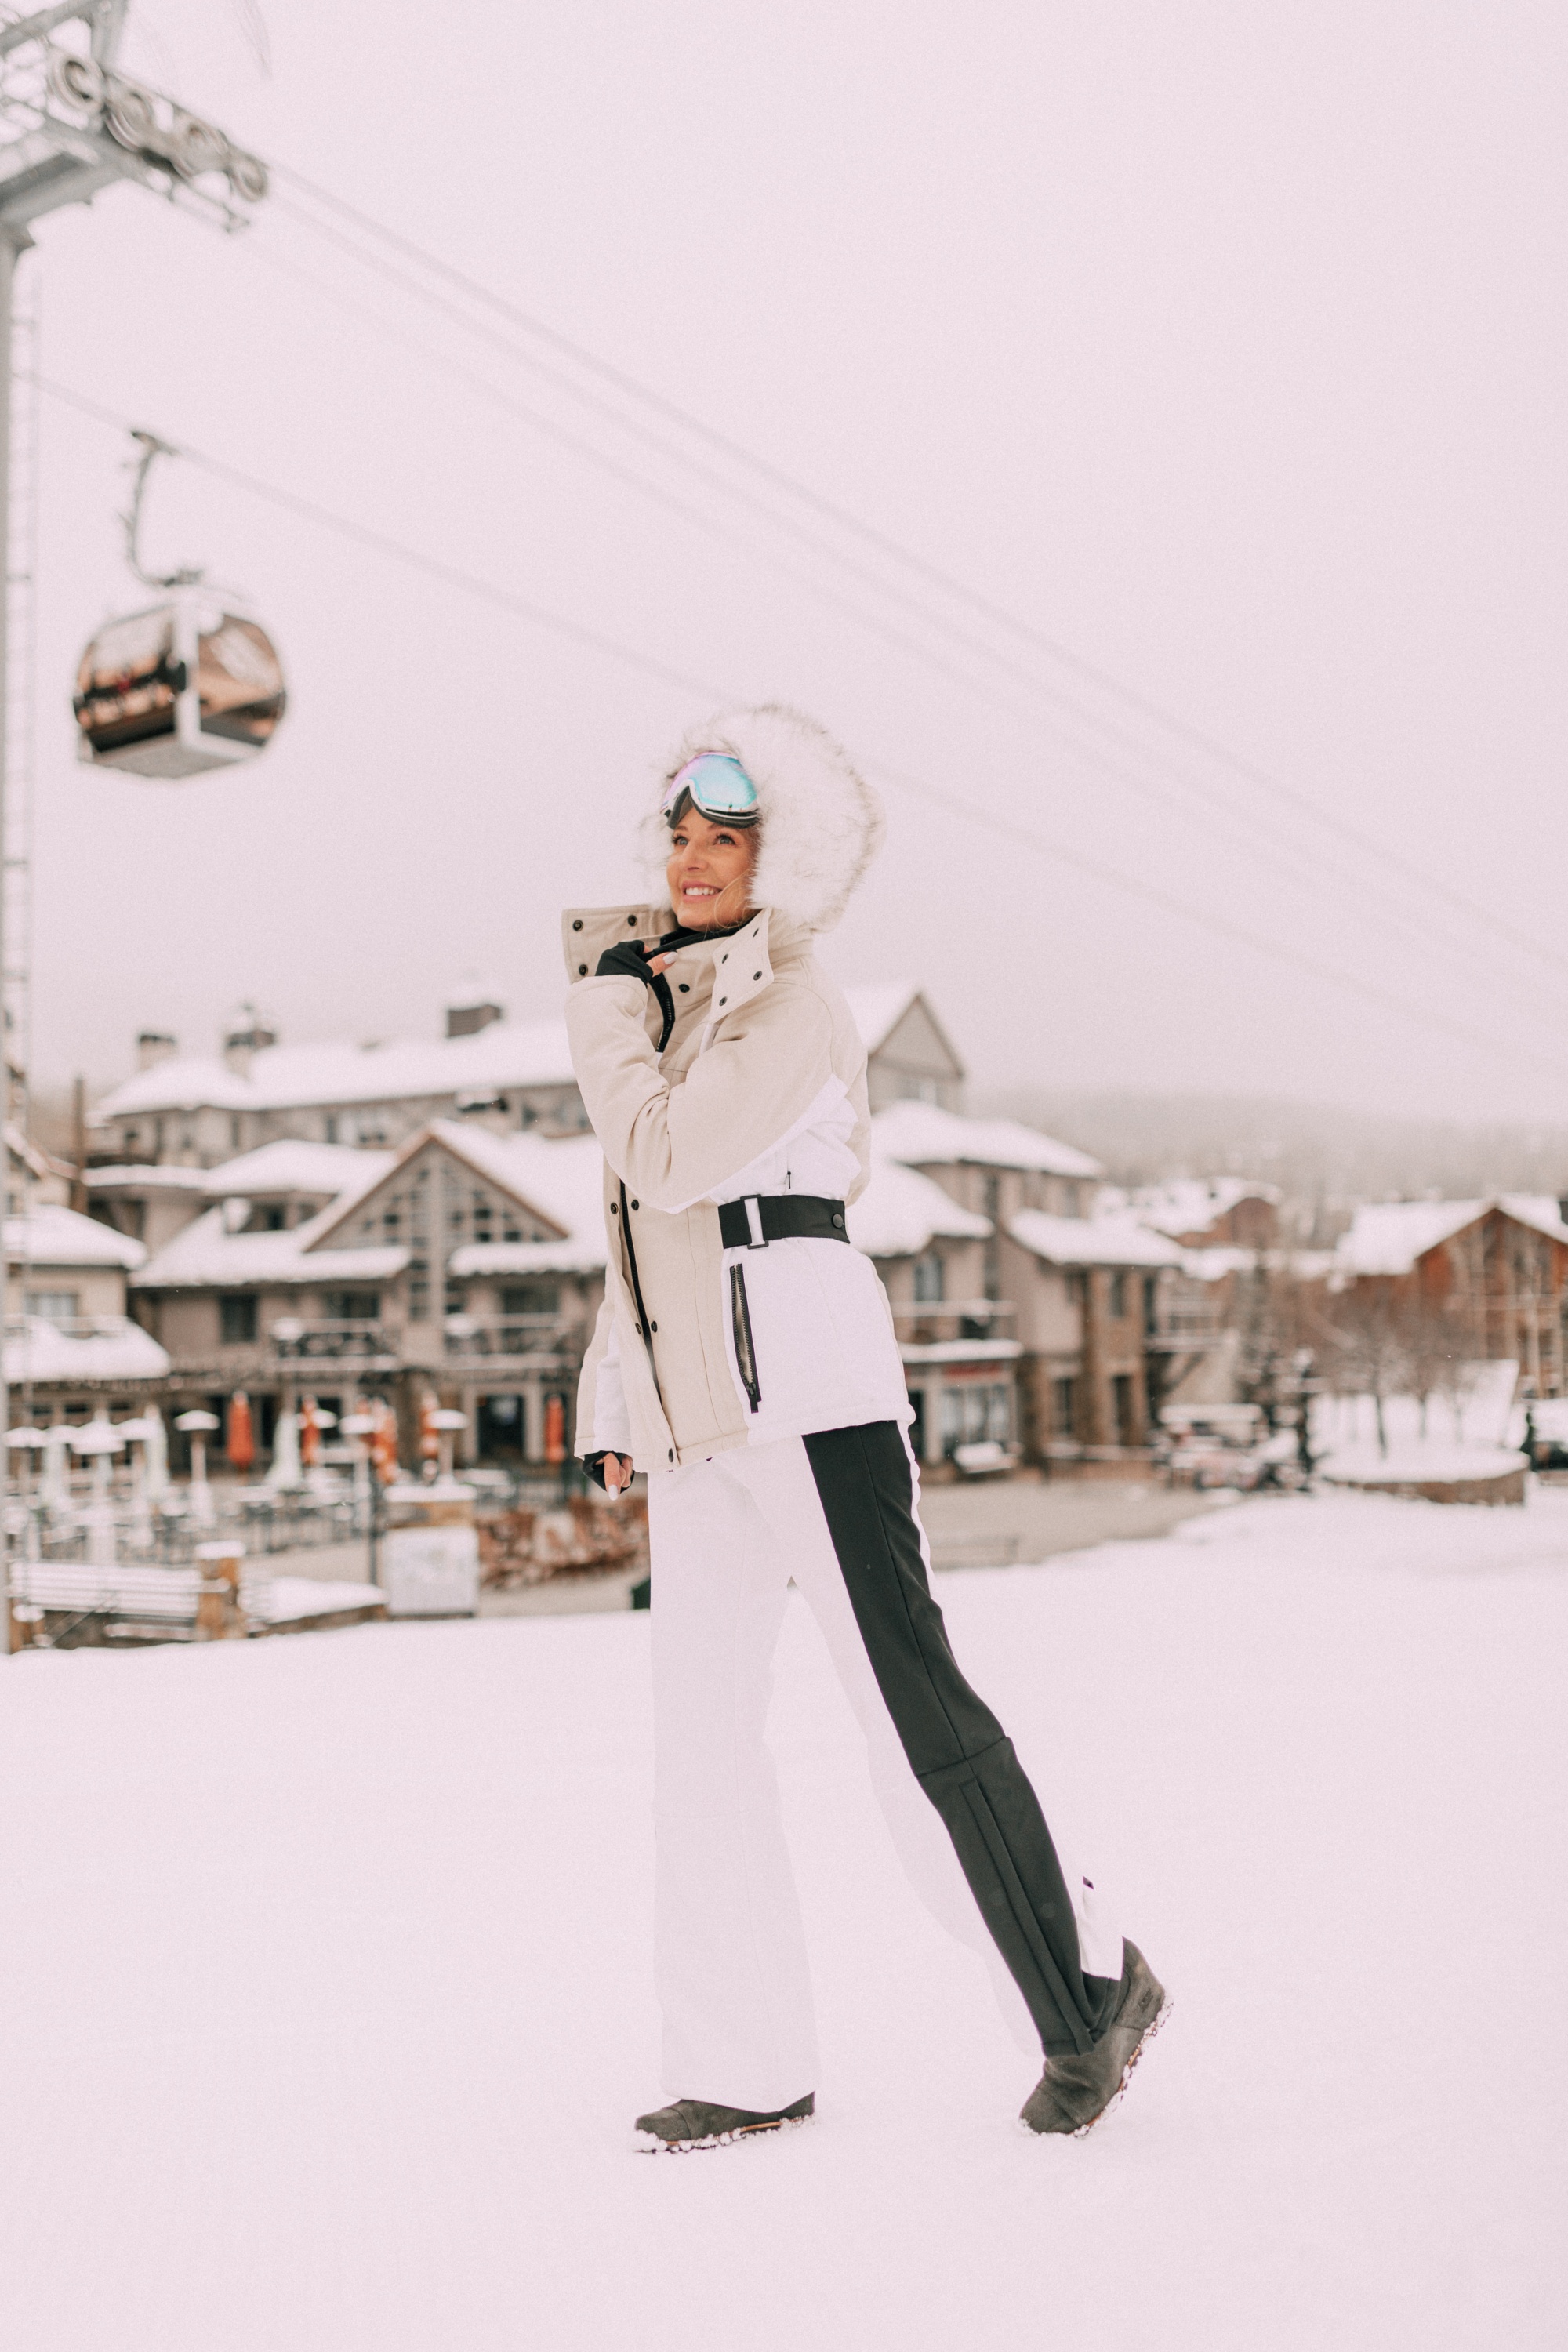 Chic Ski Gear, Fashion Blogger Over 40 Erin Busbee of BusbeeStyle.com wearing a tan and white coat, white striped ski pants, and peach color block bodysuit by Topshop SNO from Nordstrom in Telluride, Colorado